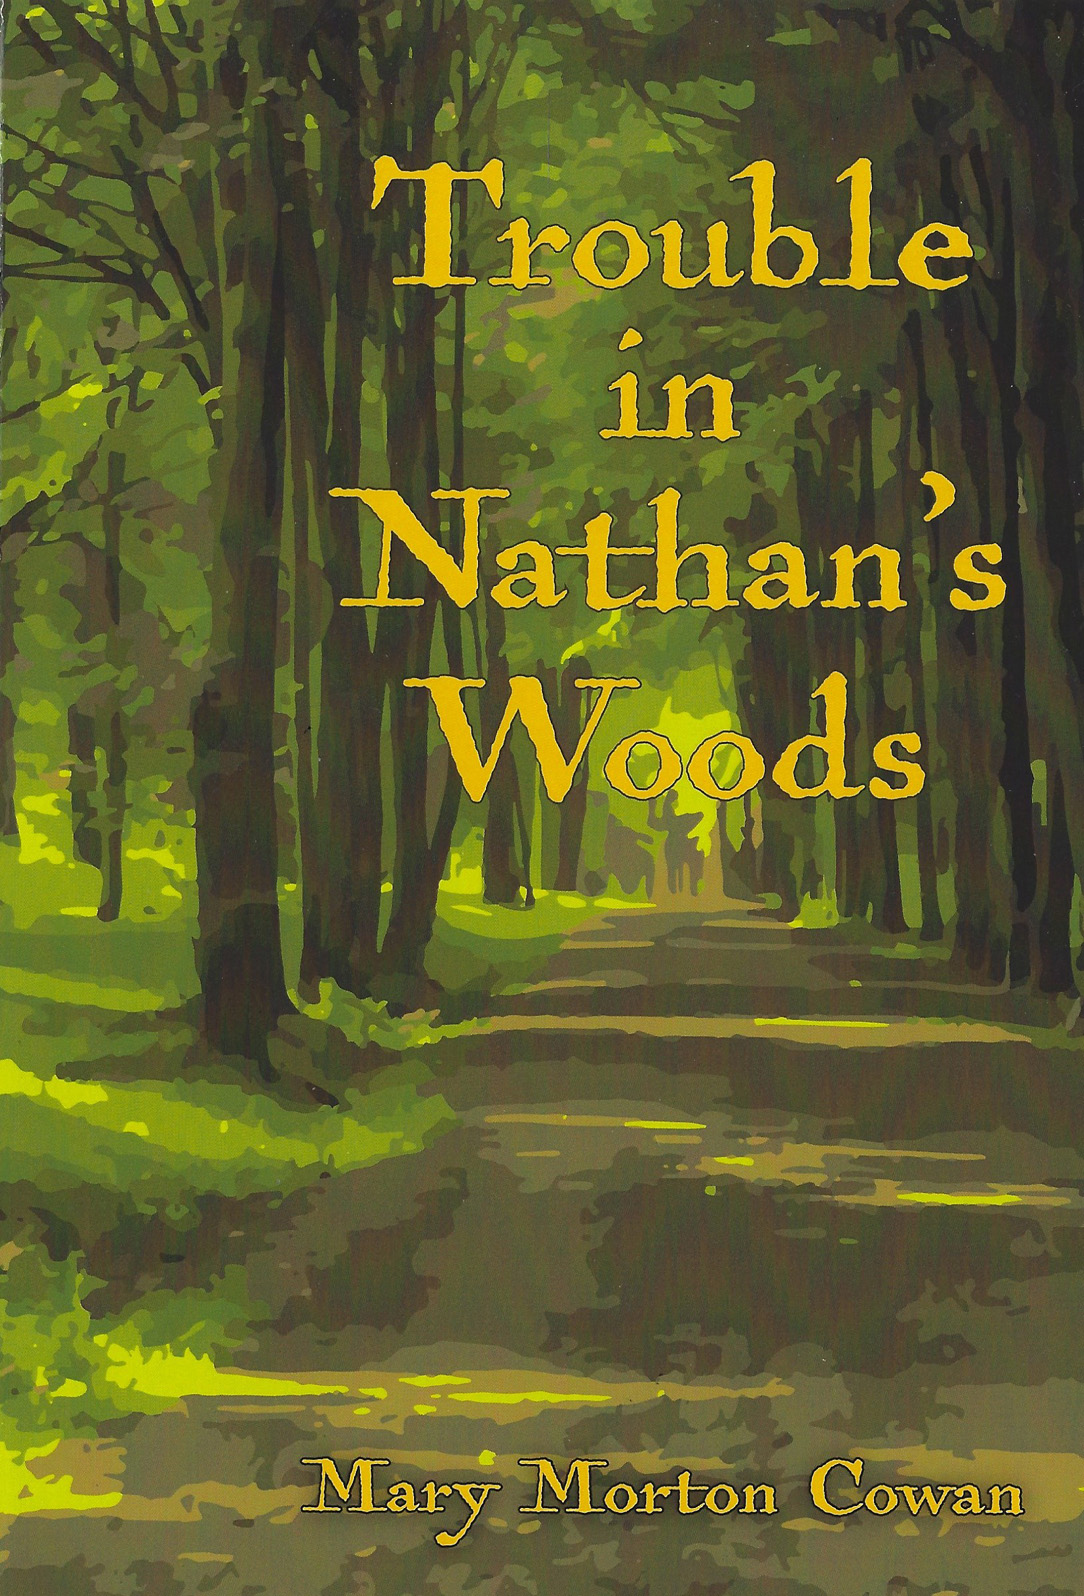 Trouble in Nathan's Woods - book cover